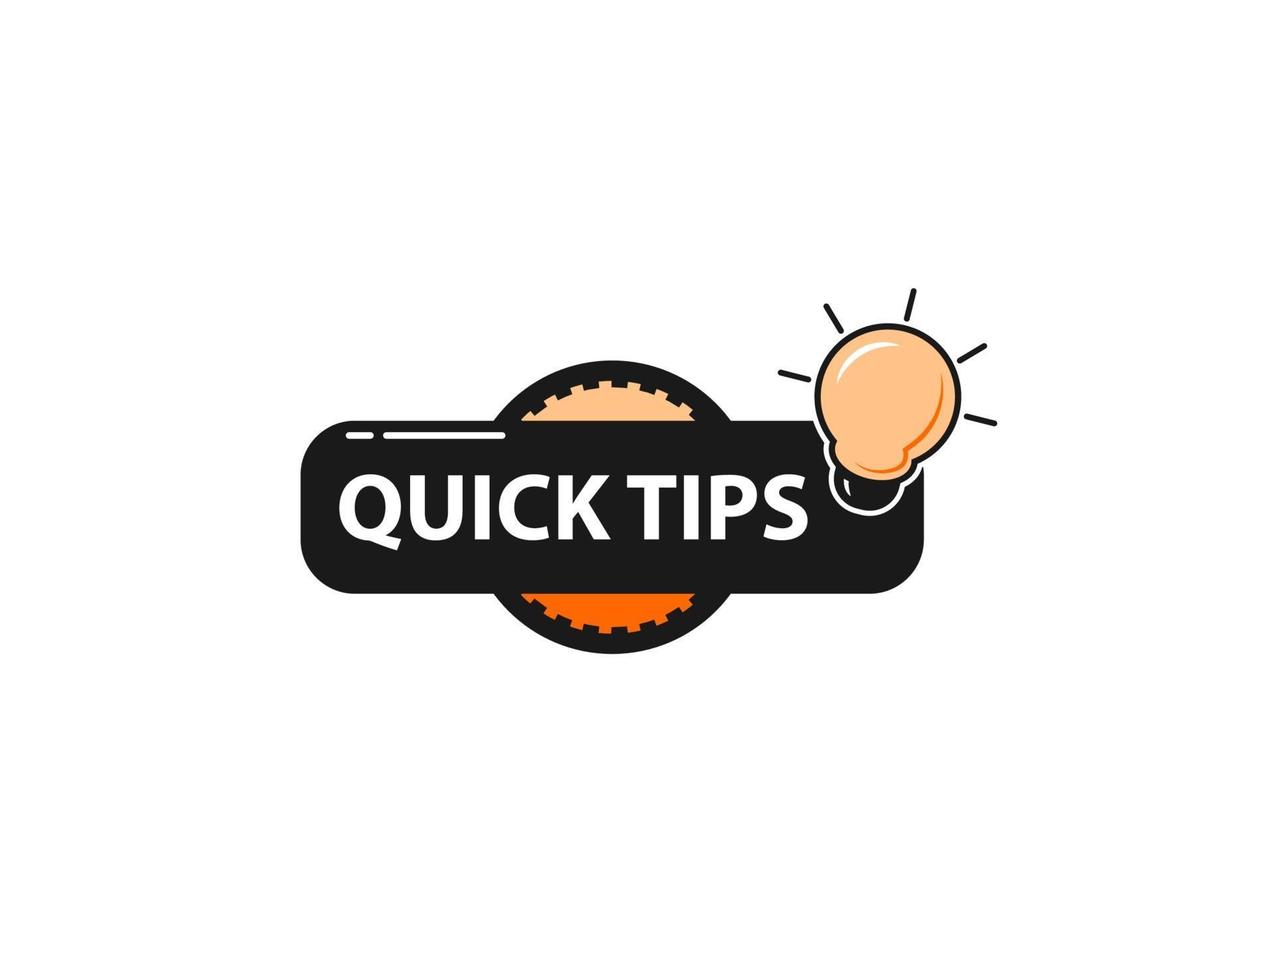 Quick tips banner design. business idea, guide banners template vector